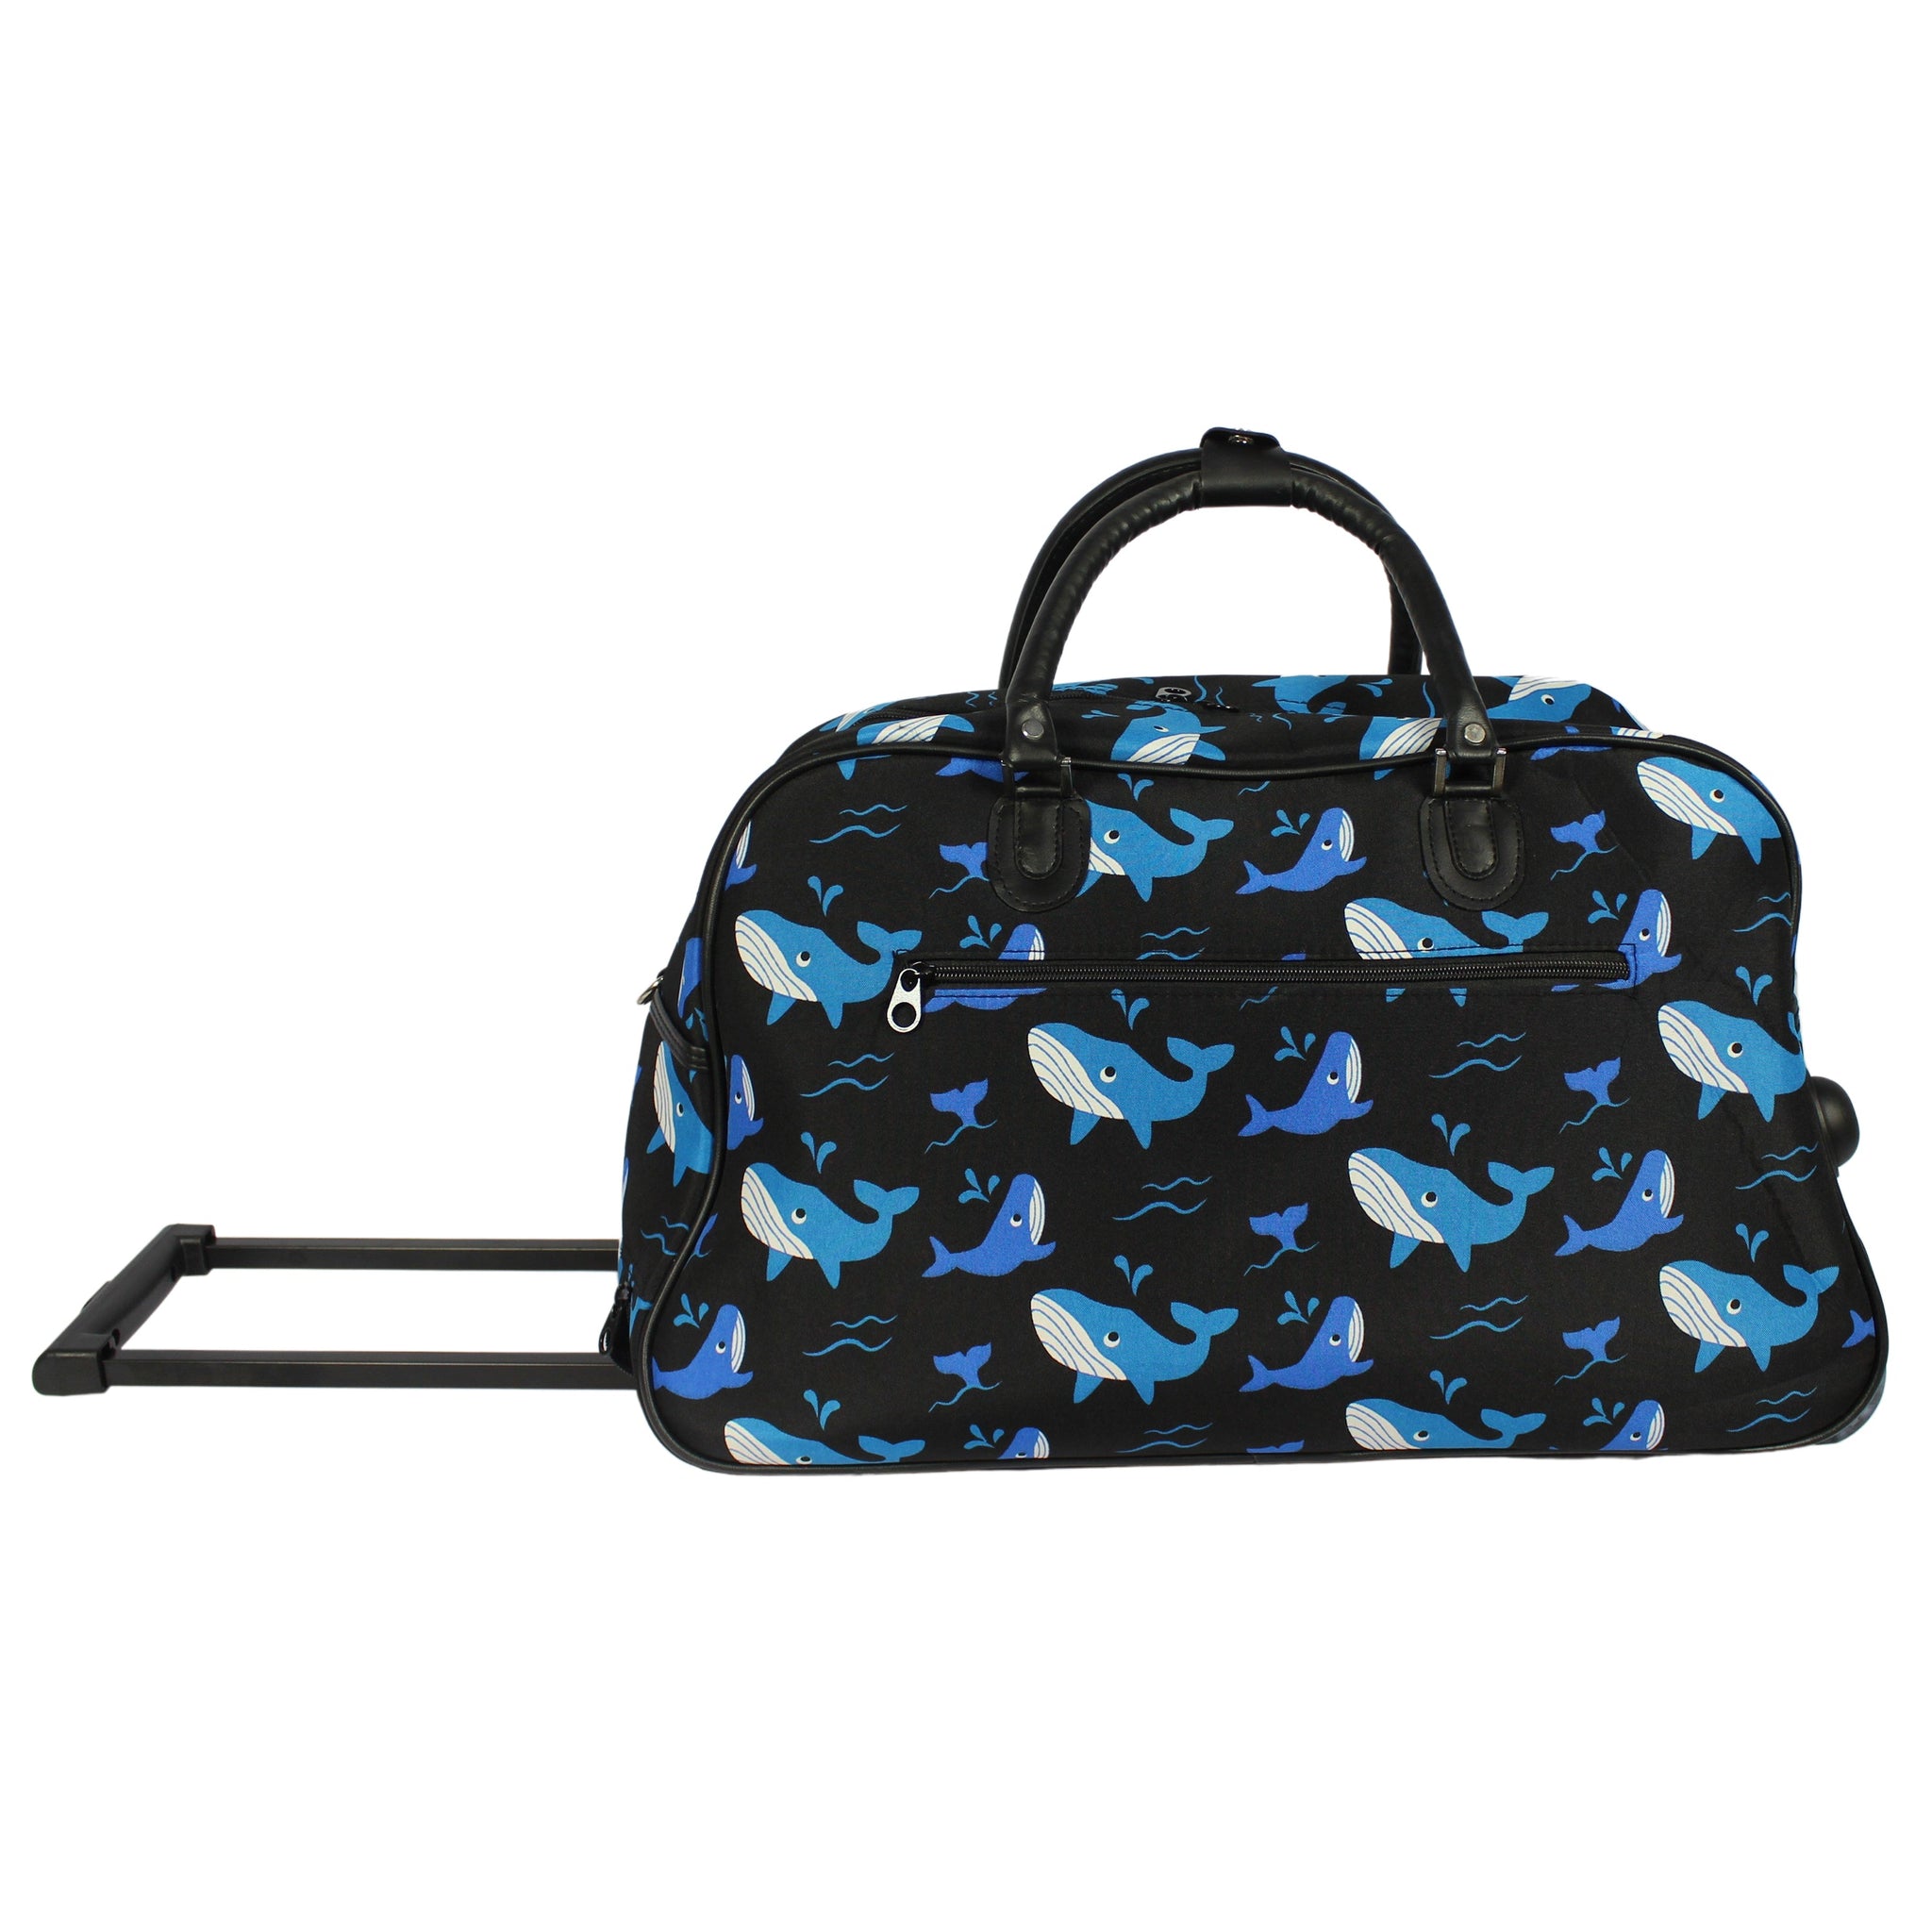 CalBags 21" Rolling Carry-On Duffel Bag - Whale